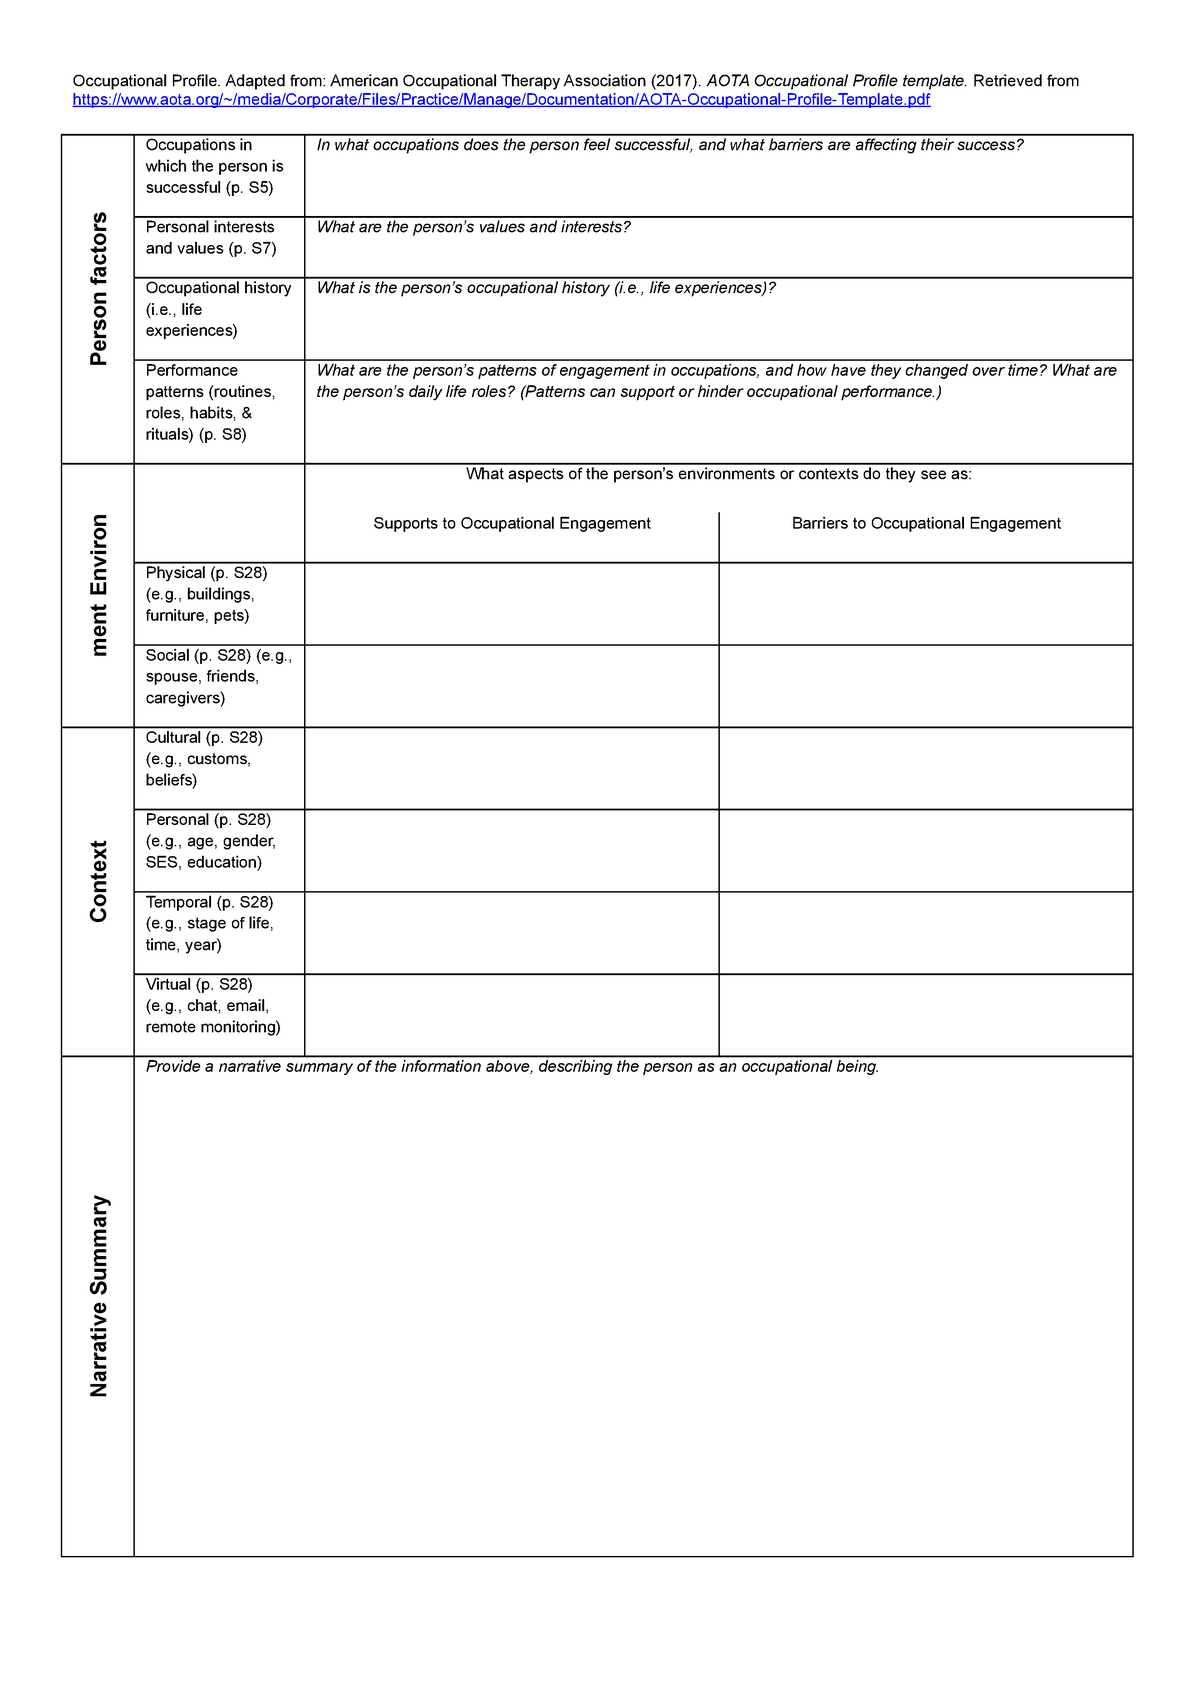 Occupational Profile Template Occupational Profile. Adapted from